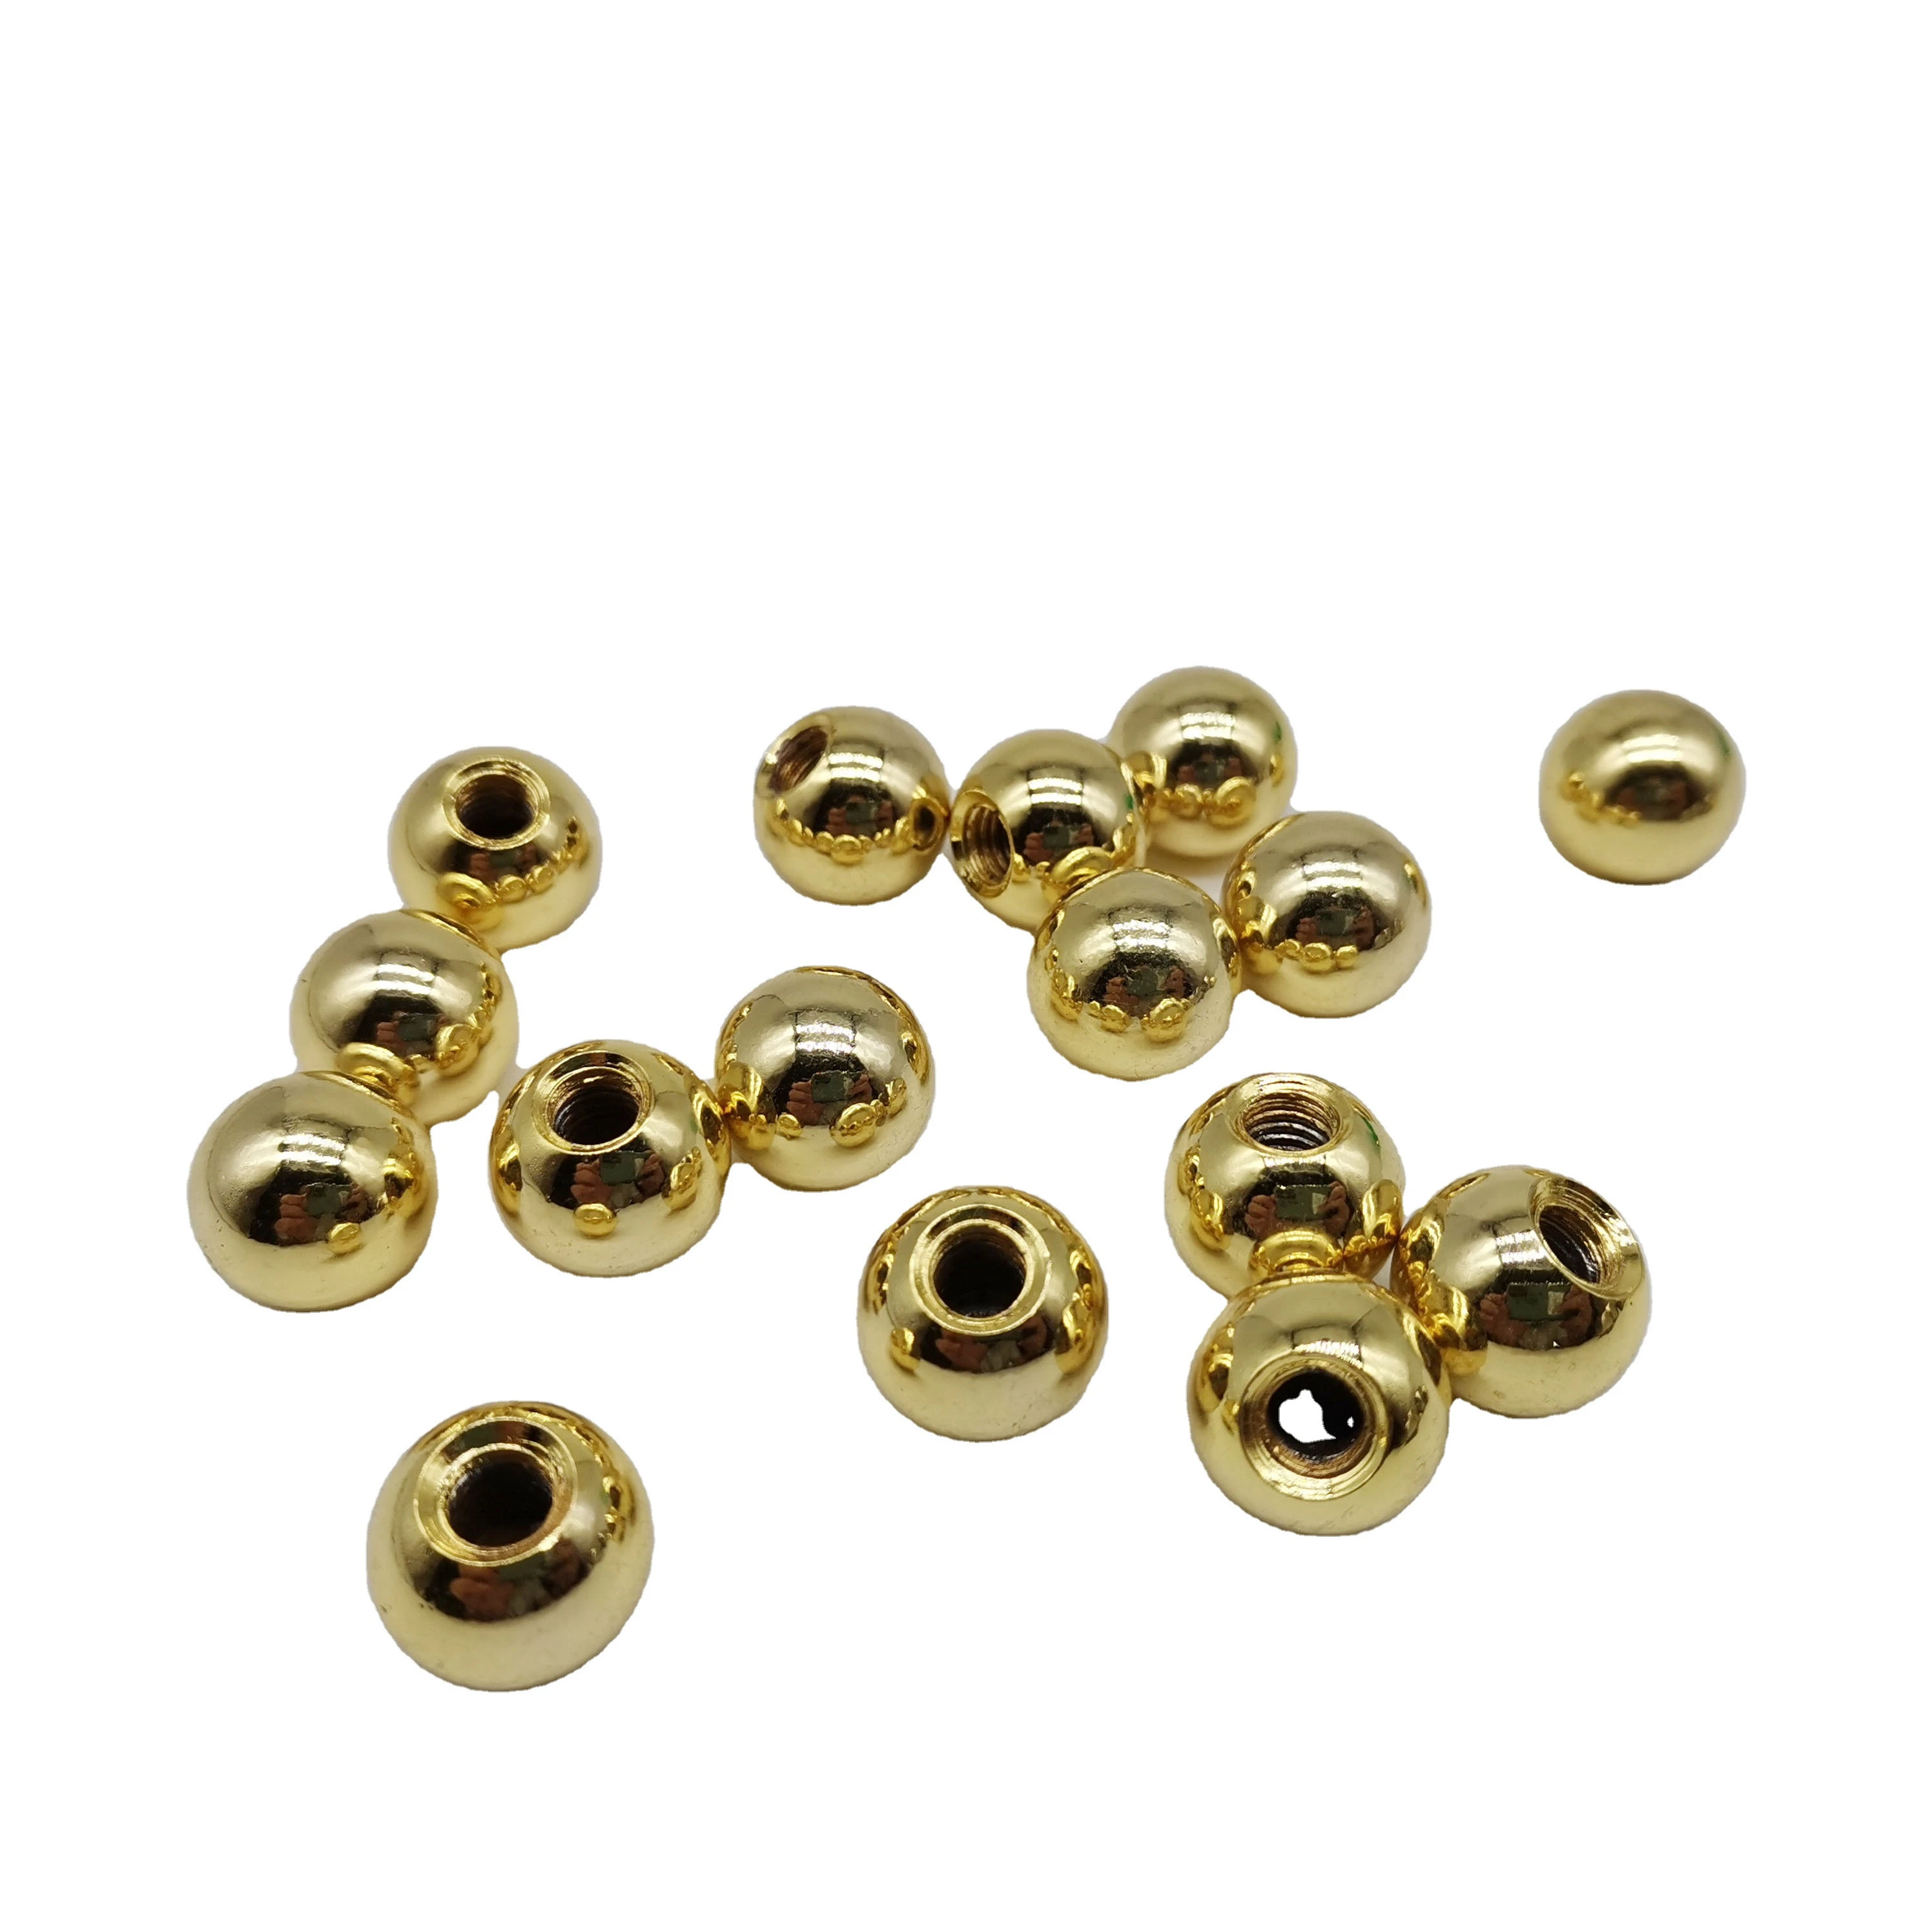 Custom 9mm 10mm 15mm 18mm stainless steel sphere hardware decorative metal ball with inner hole threaded solid metal ball